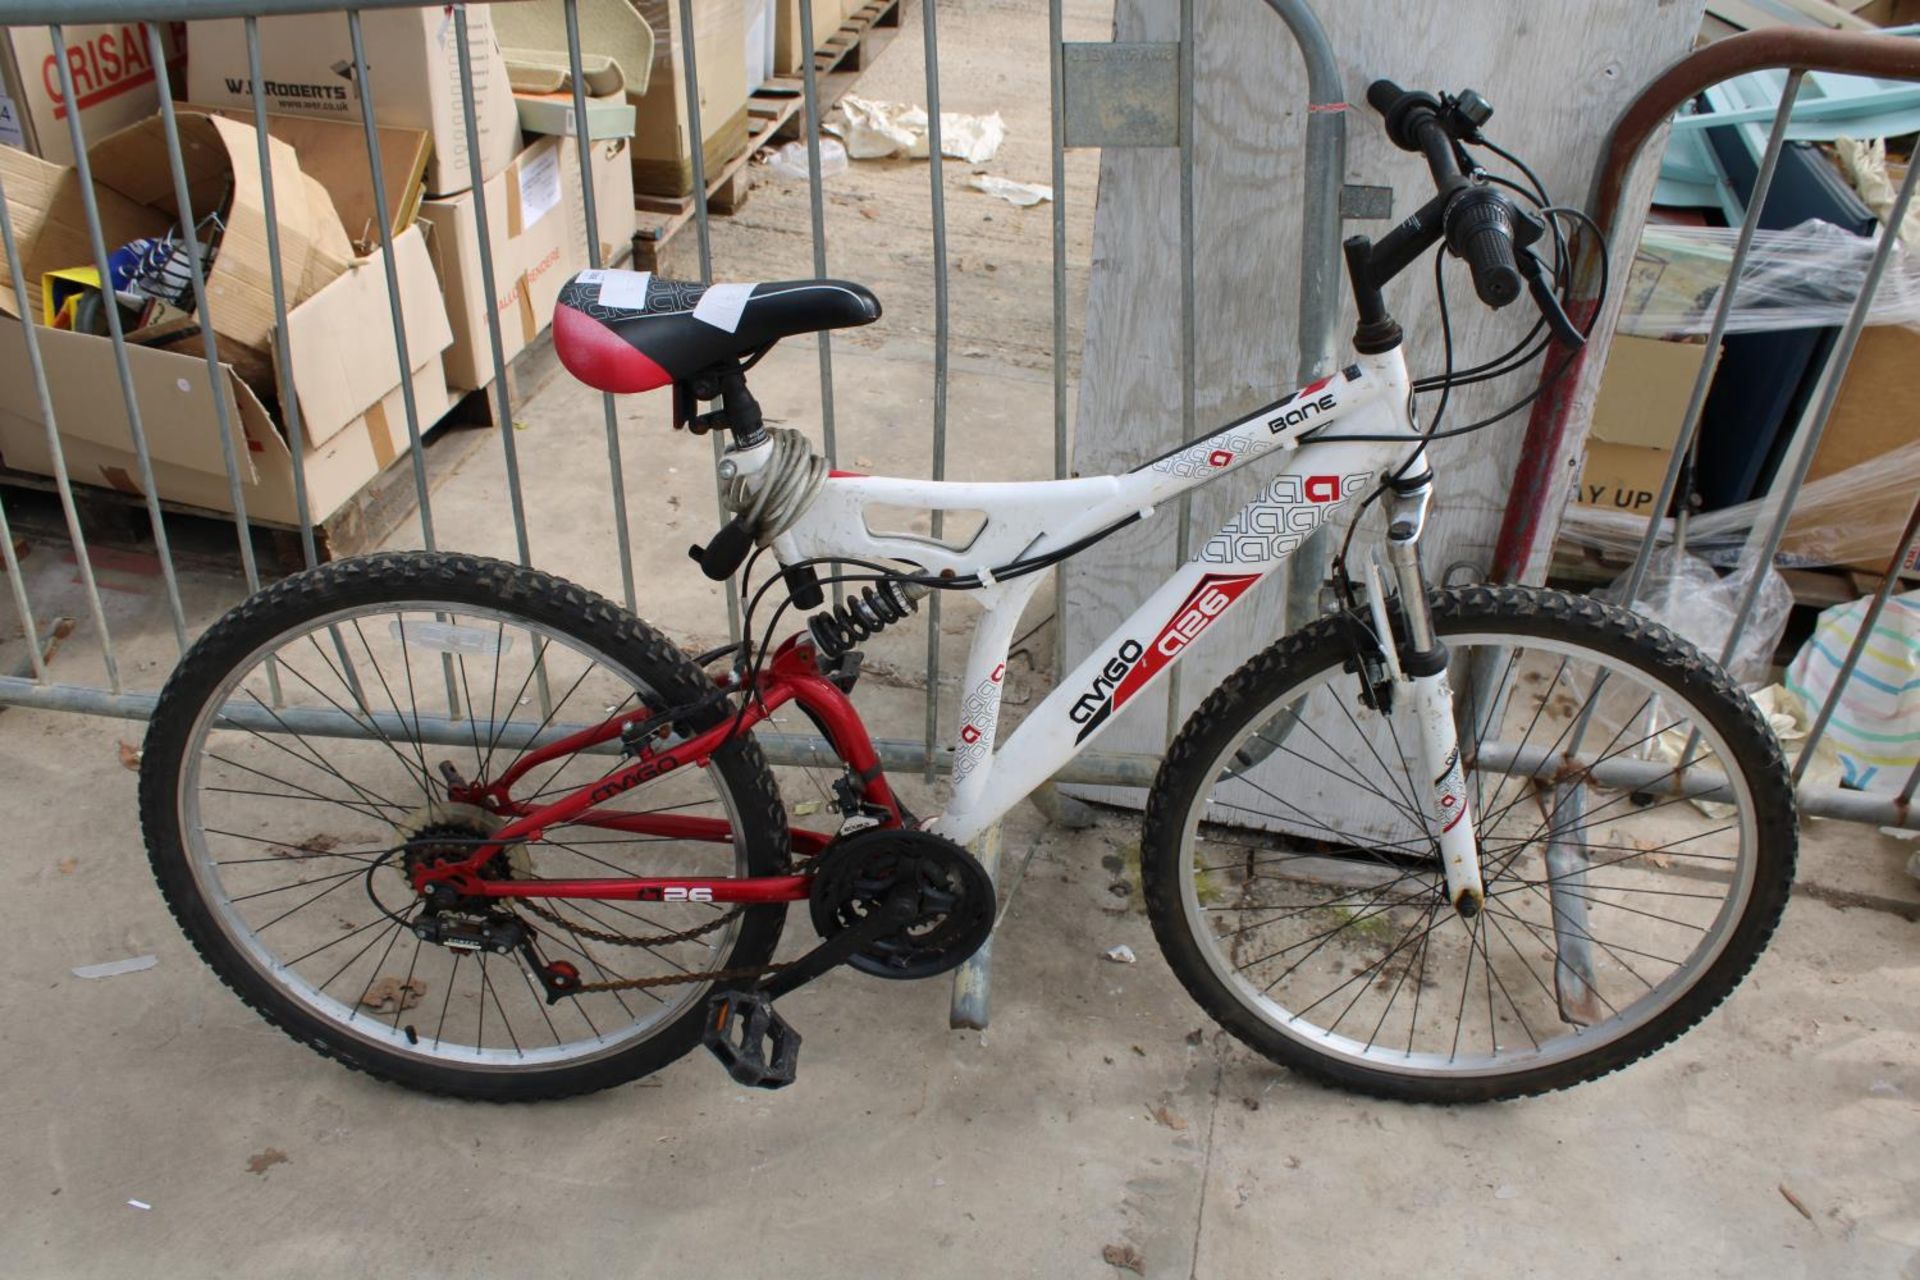 A GENTS MOUNTAIN BIKE WITH FRONT AND REAR SUSPENSION AND 12 SPEED GEAR SYSTEM